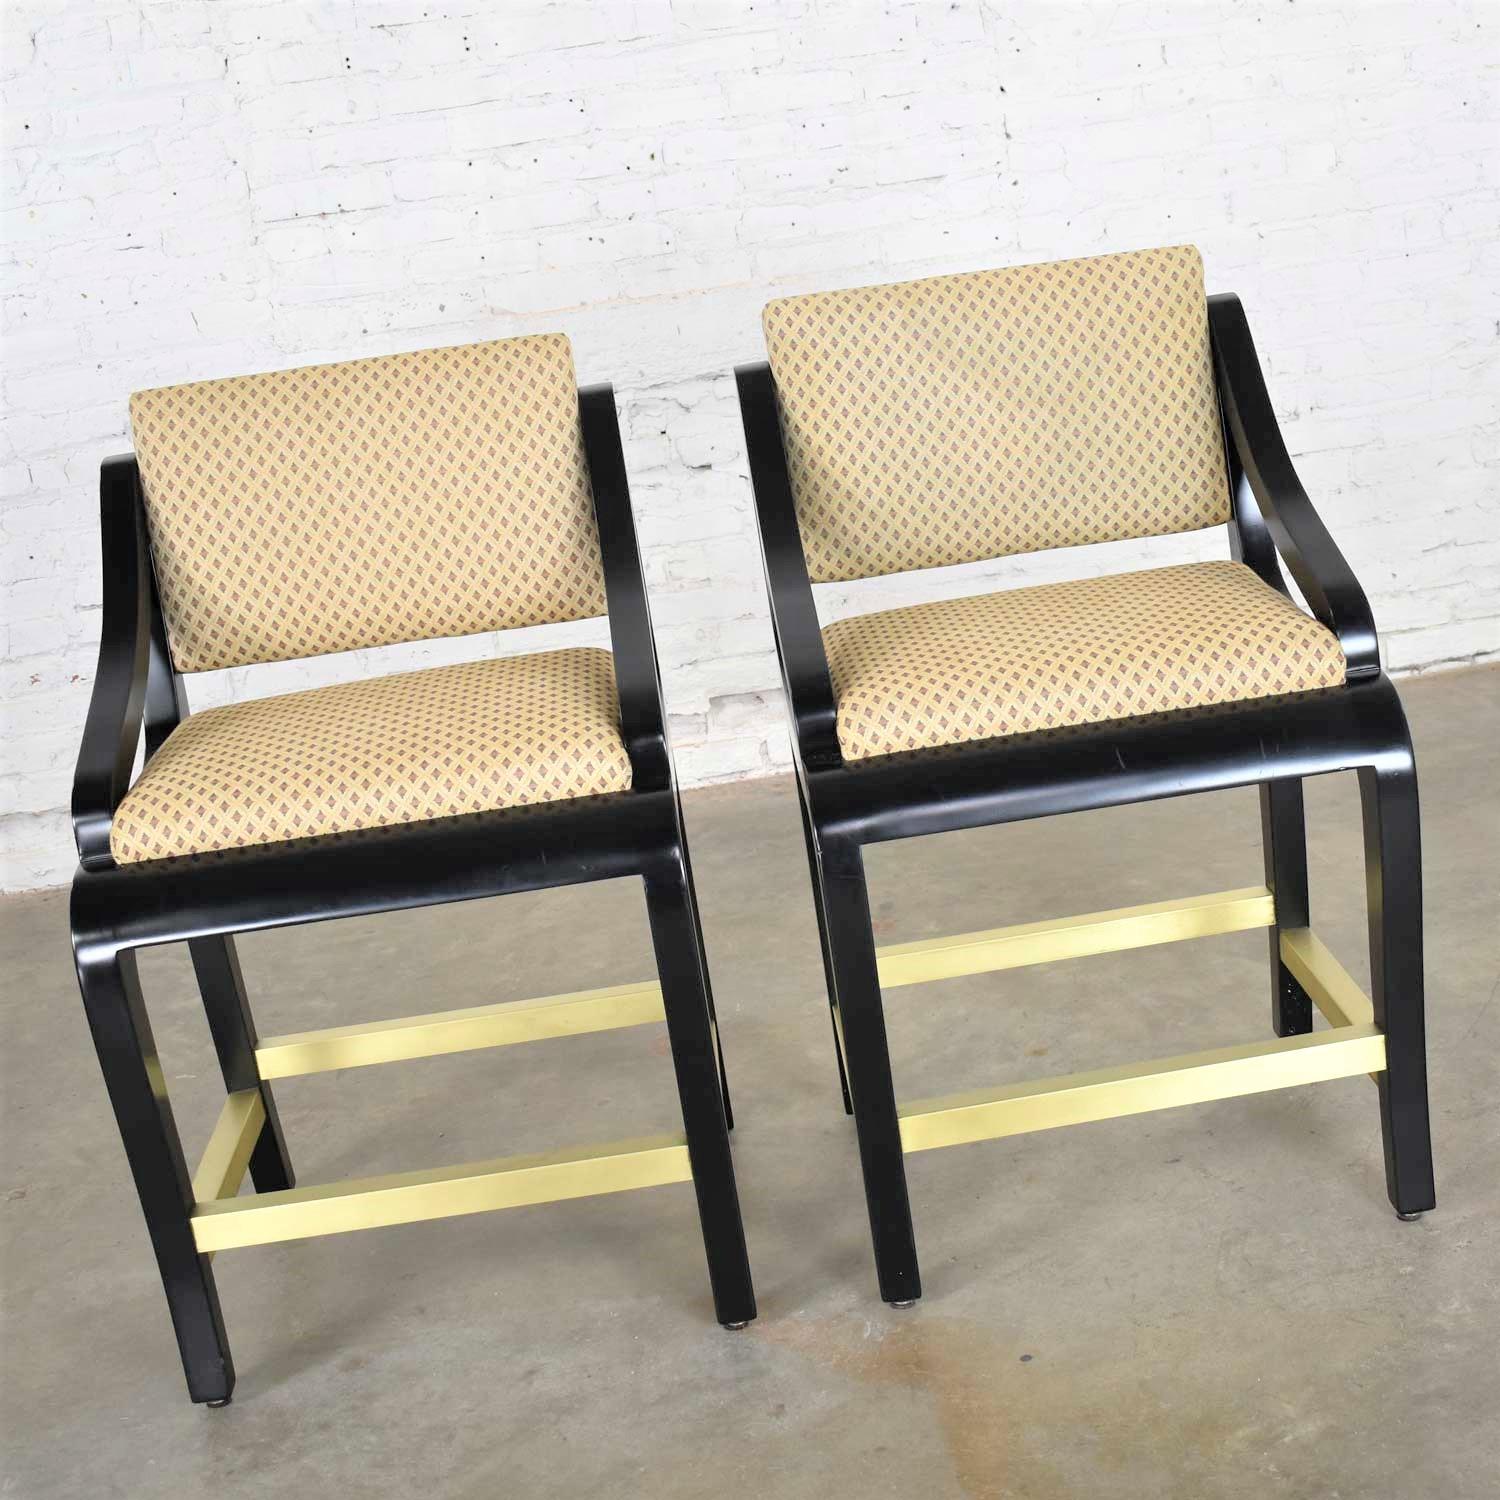 Handsome pair of modern counter height bar stools with a black painted frame, square brass foot rungs, and upholstered seat and back made by Stewart Furniture Manufacturing Co., Inc. for Beverly Interiors. They are in wonderful vintage condition.